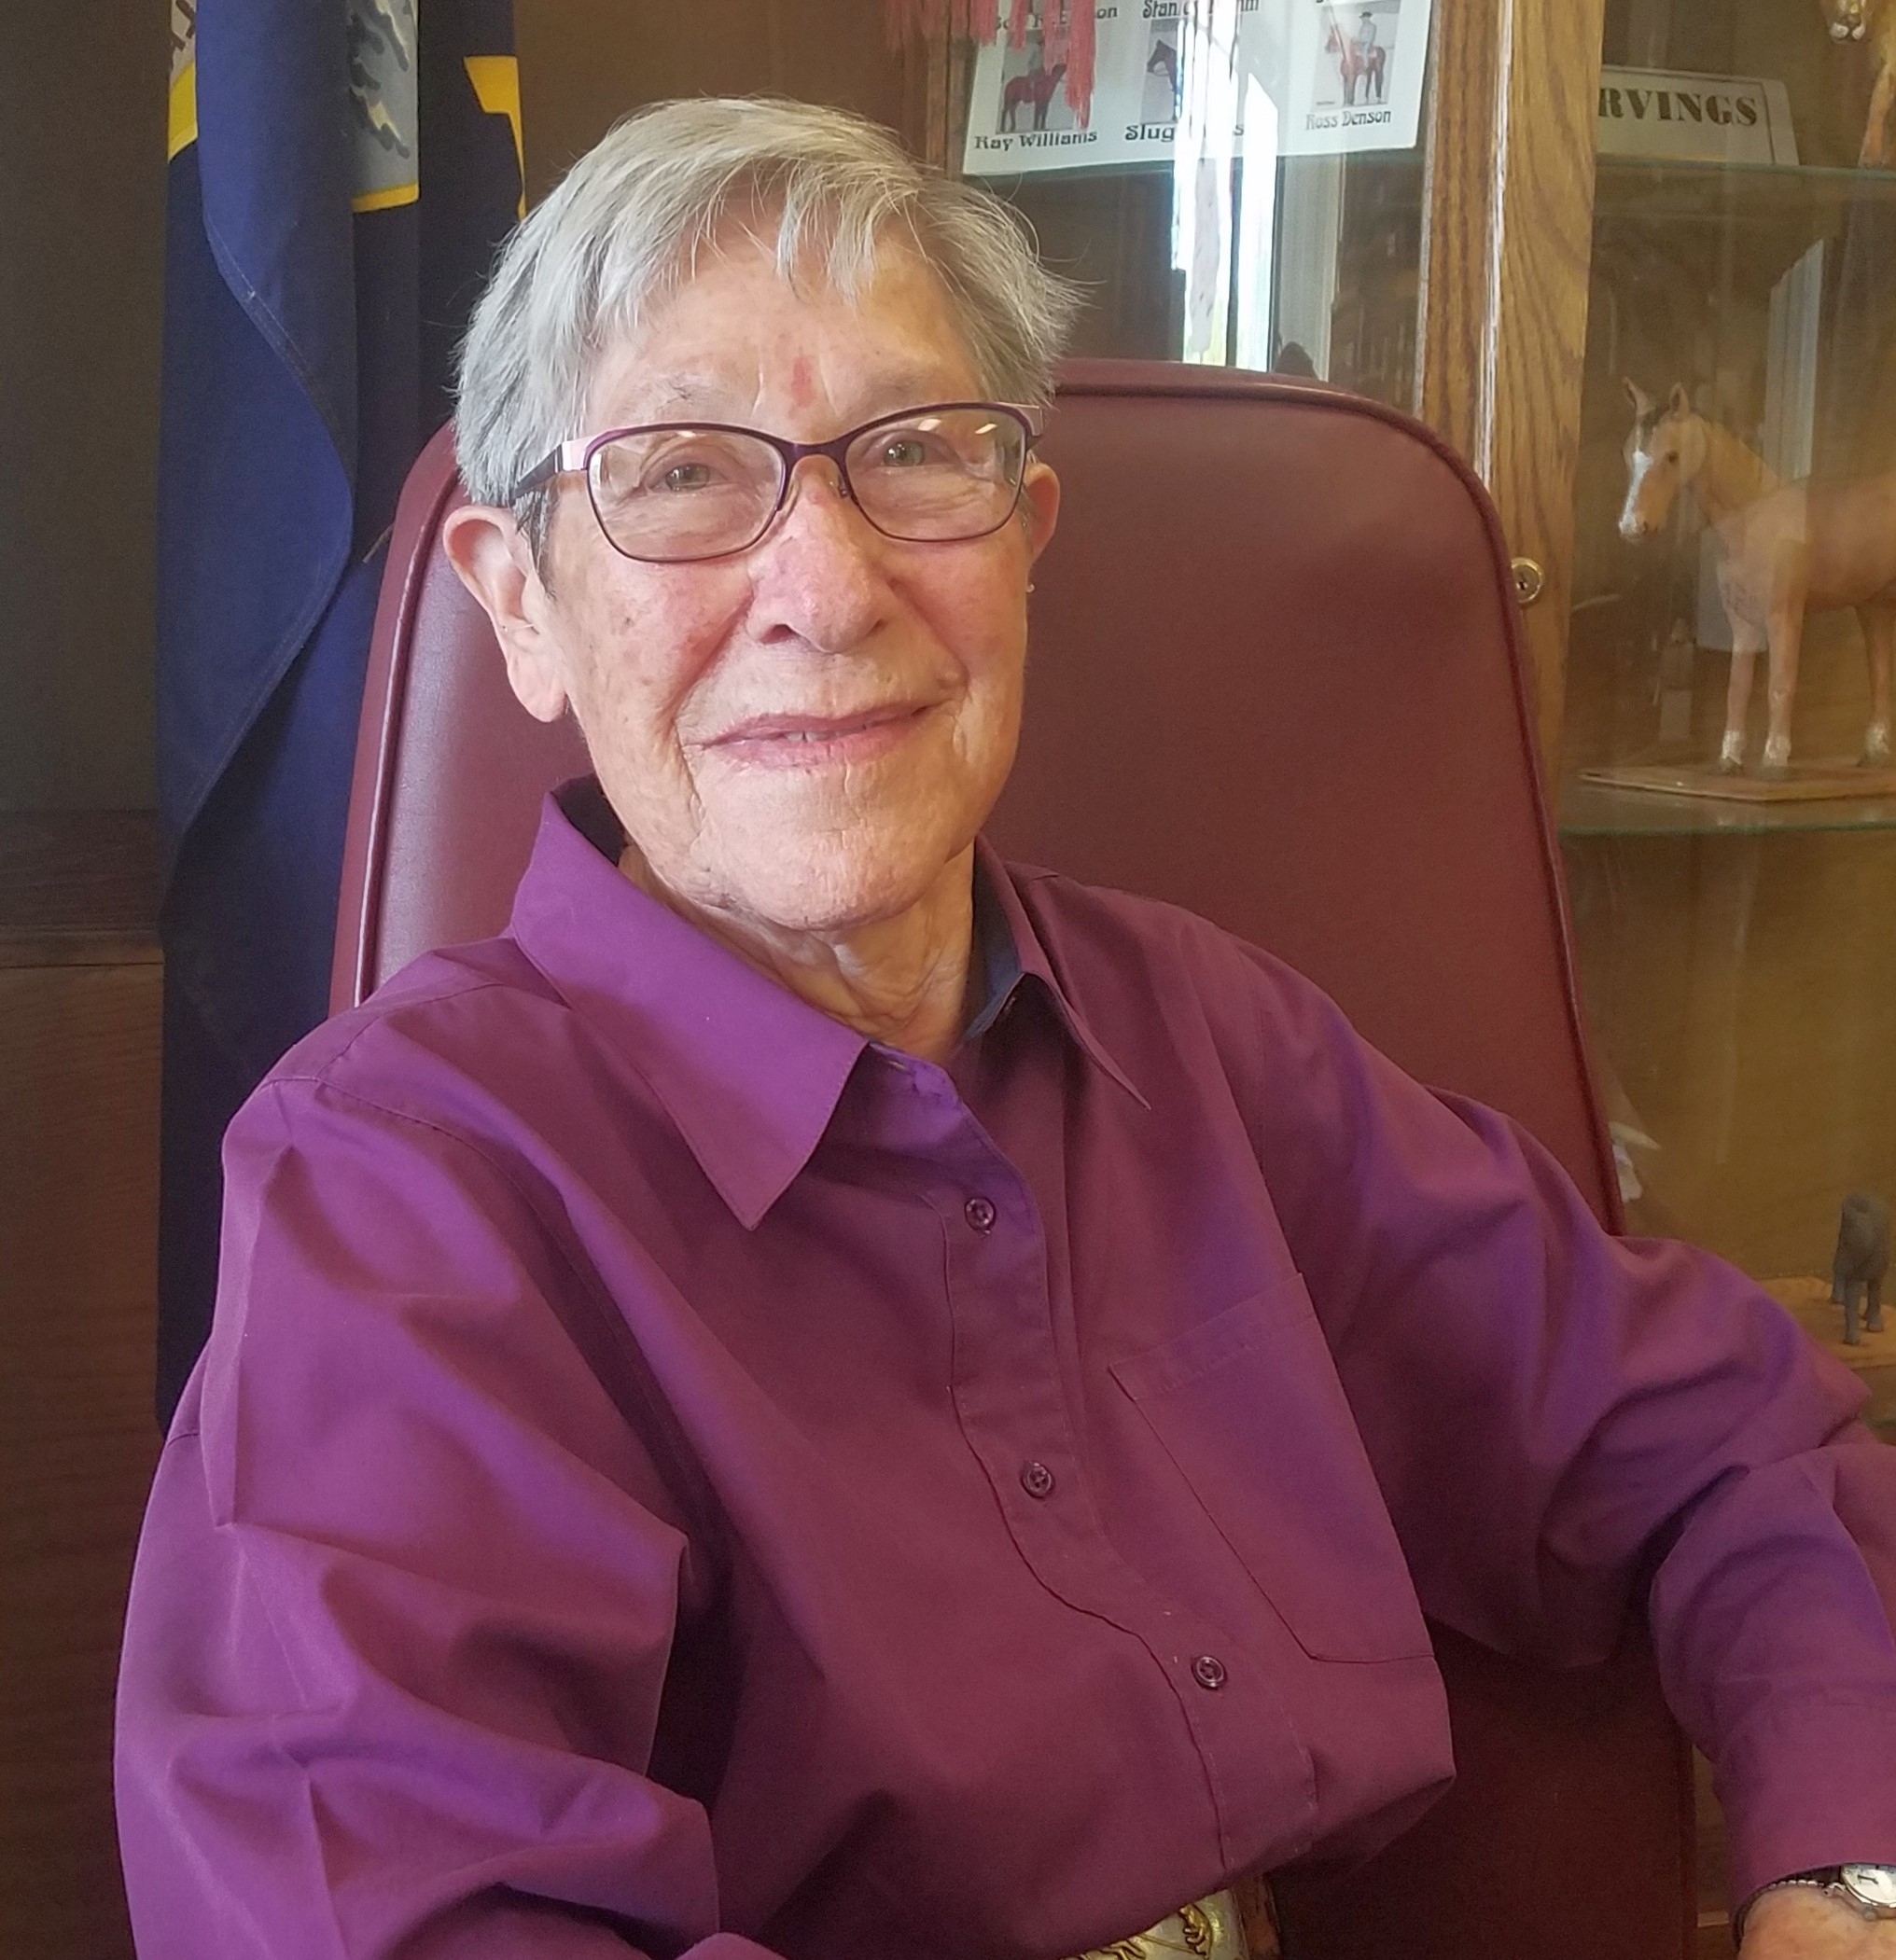 MARIE SCOVILLE TALKS ABOUT LIFE IN POWDER RIVER, MONTANA